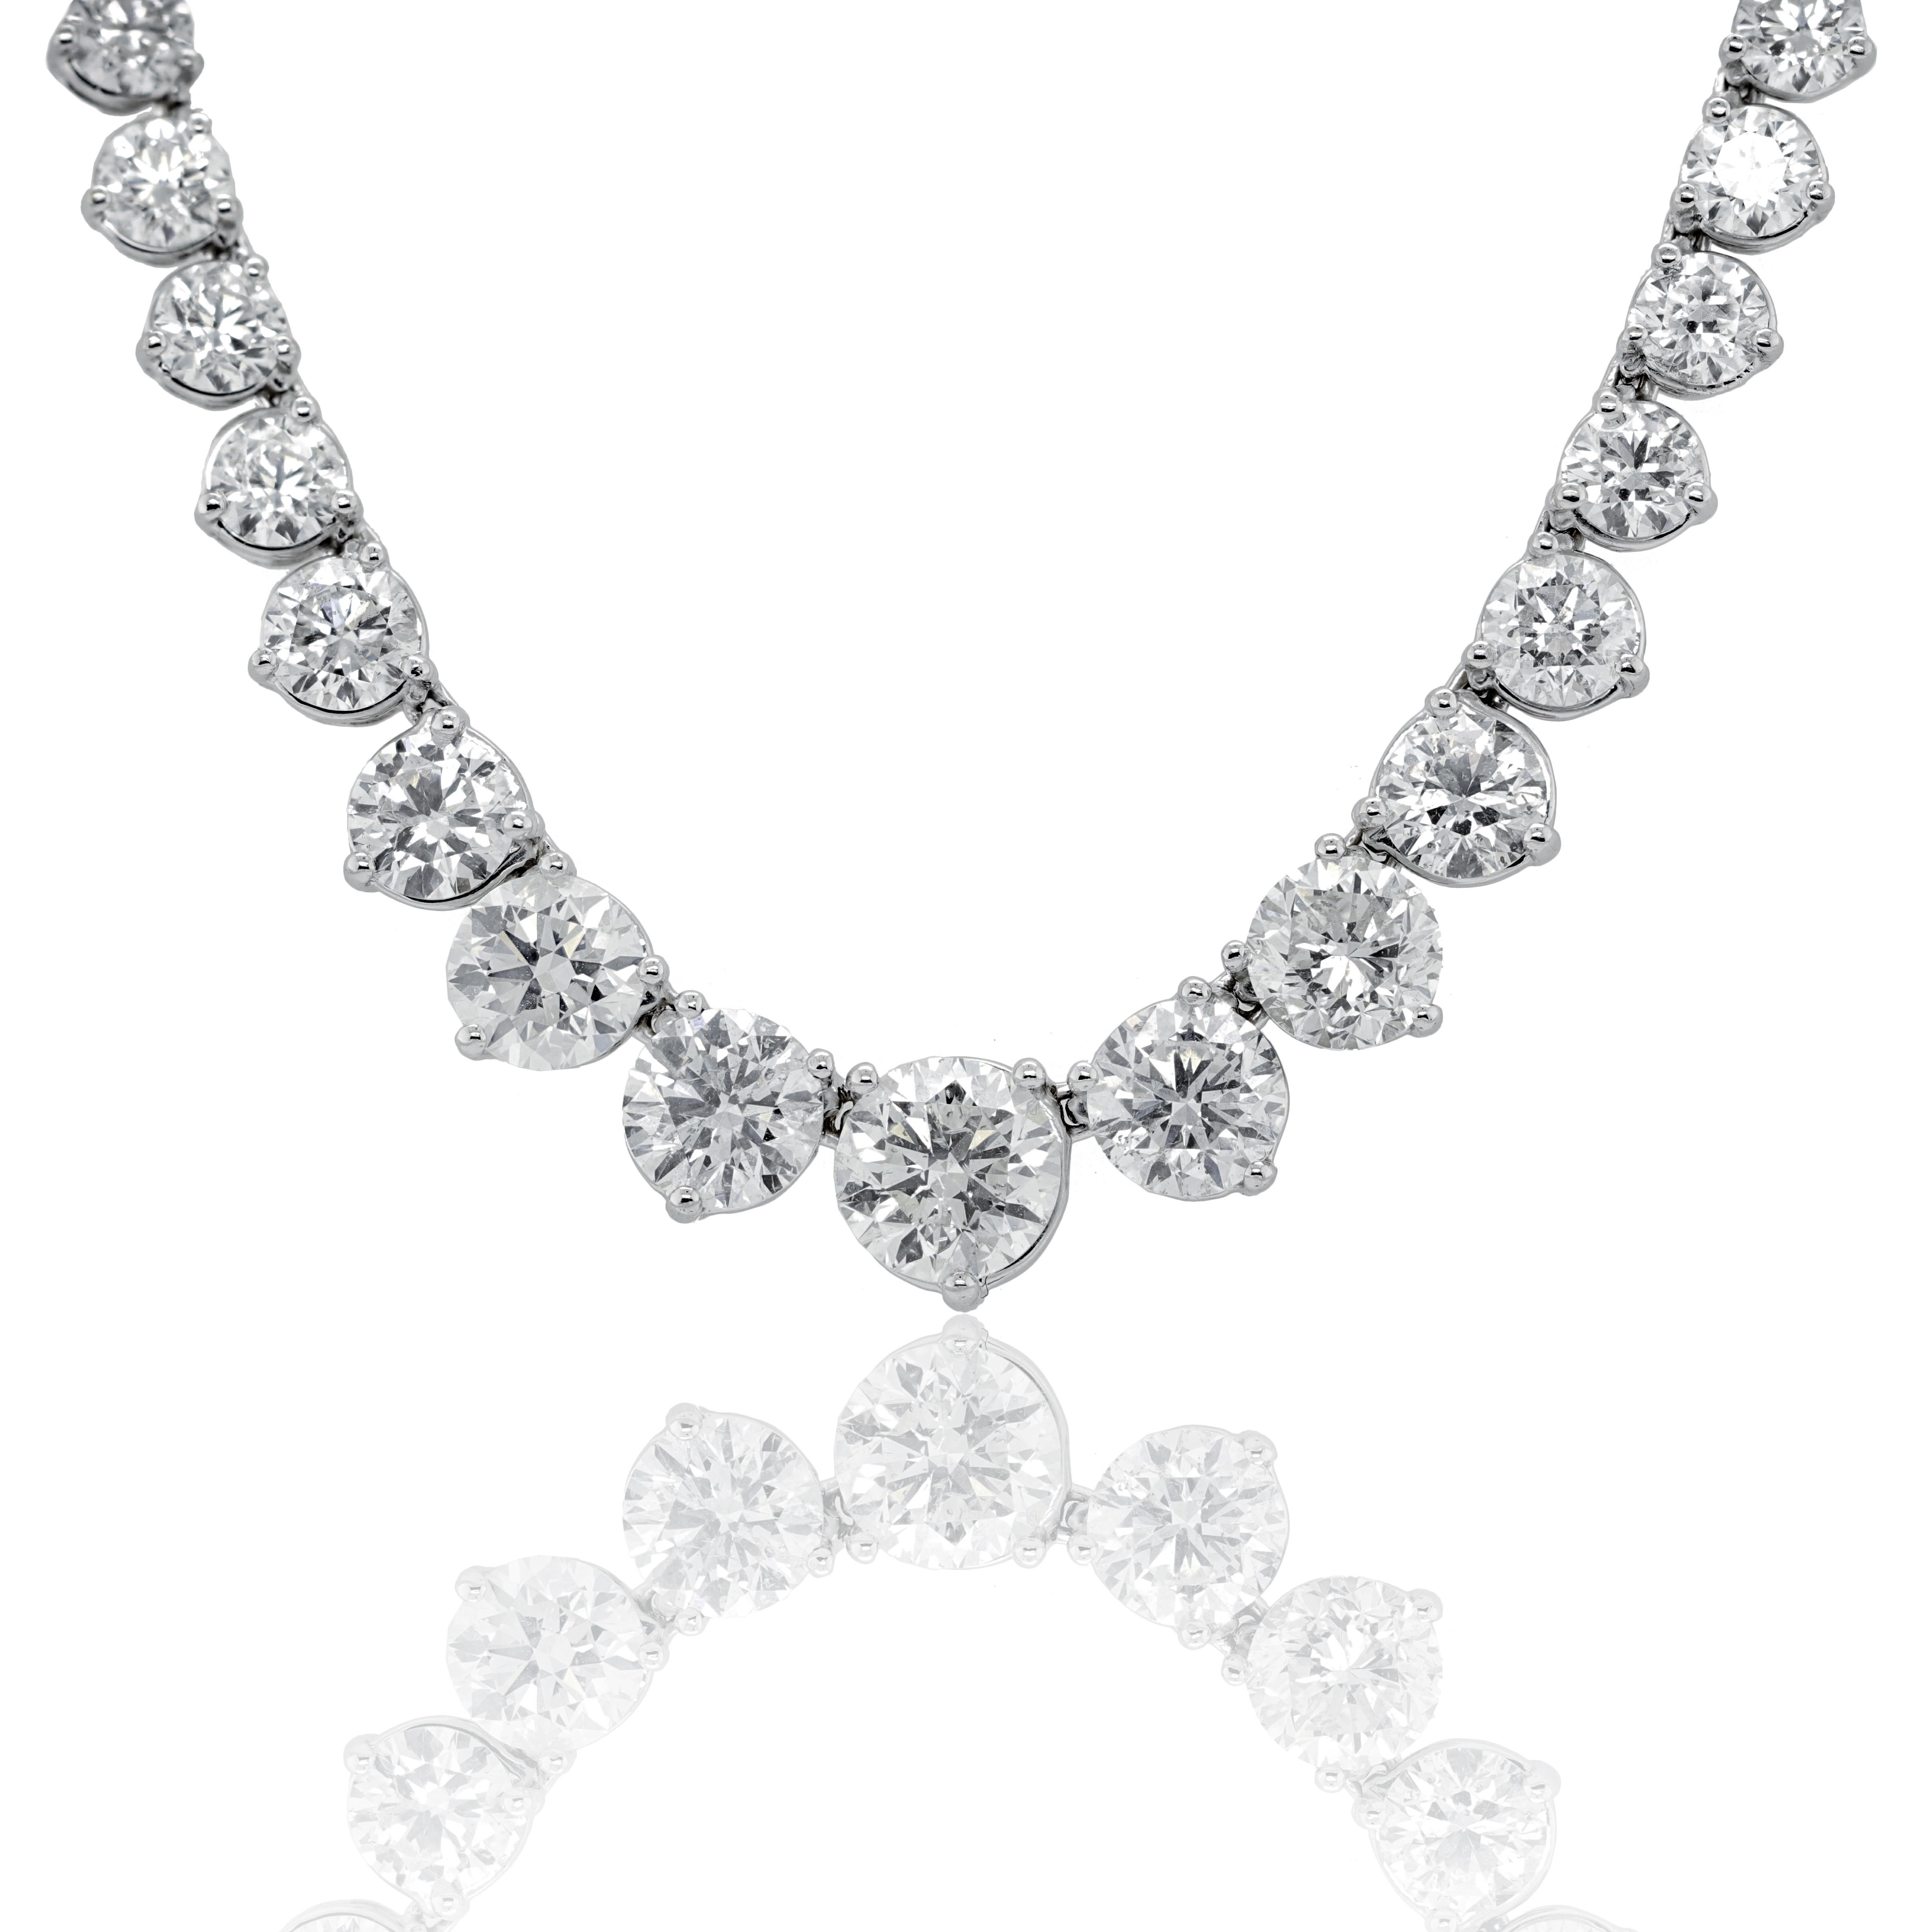 Custom 18k white gold graduated tennis necklace  23.41 cts of round brilliant diamonds  95 stones 0.25 each  set in a 3 prong setting FG color SI clarity. Excellent  cut. 
